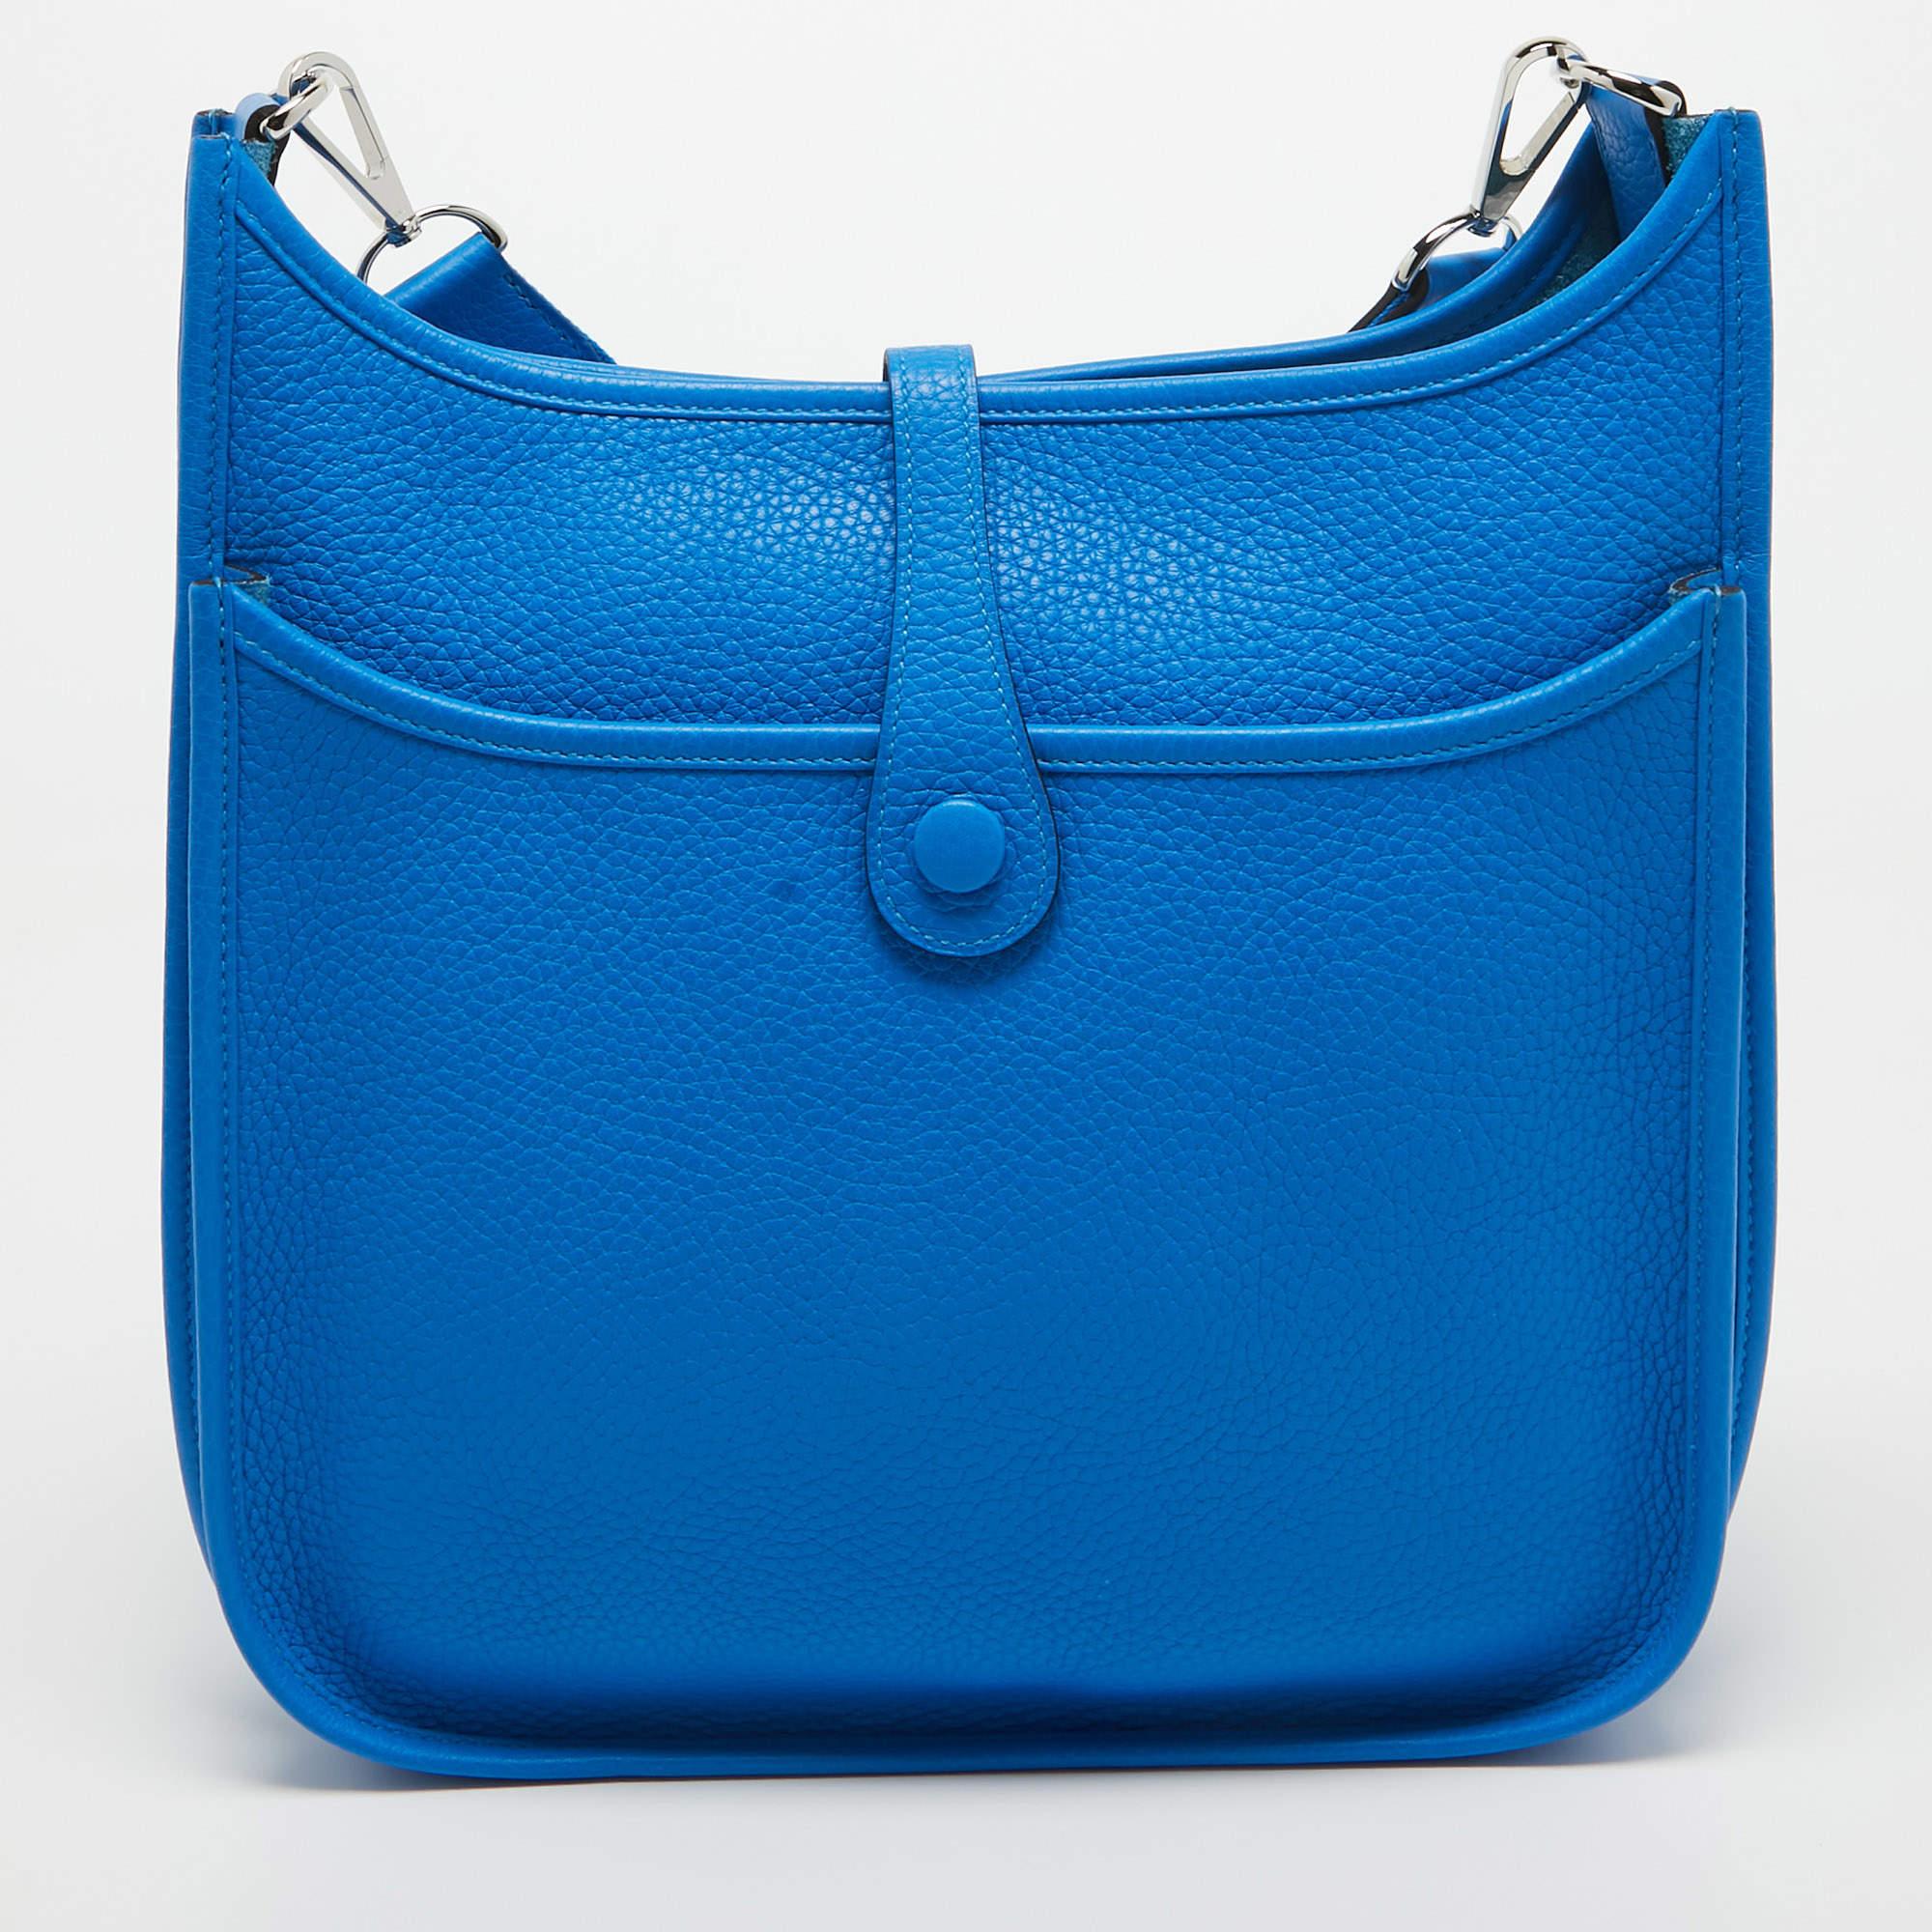 The Hermès Evelyne Bag is a luxurious accessory crafted with precision. Its vibrant blue hue, made from high-quality Taurillon Clemence leather, exudes sophistication. The Evelyne design features a perforated H logo, a spacious interior, and a